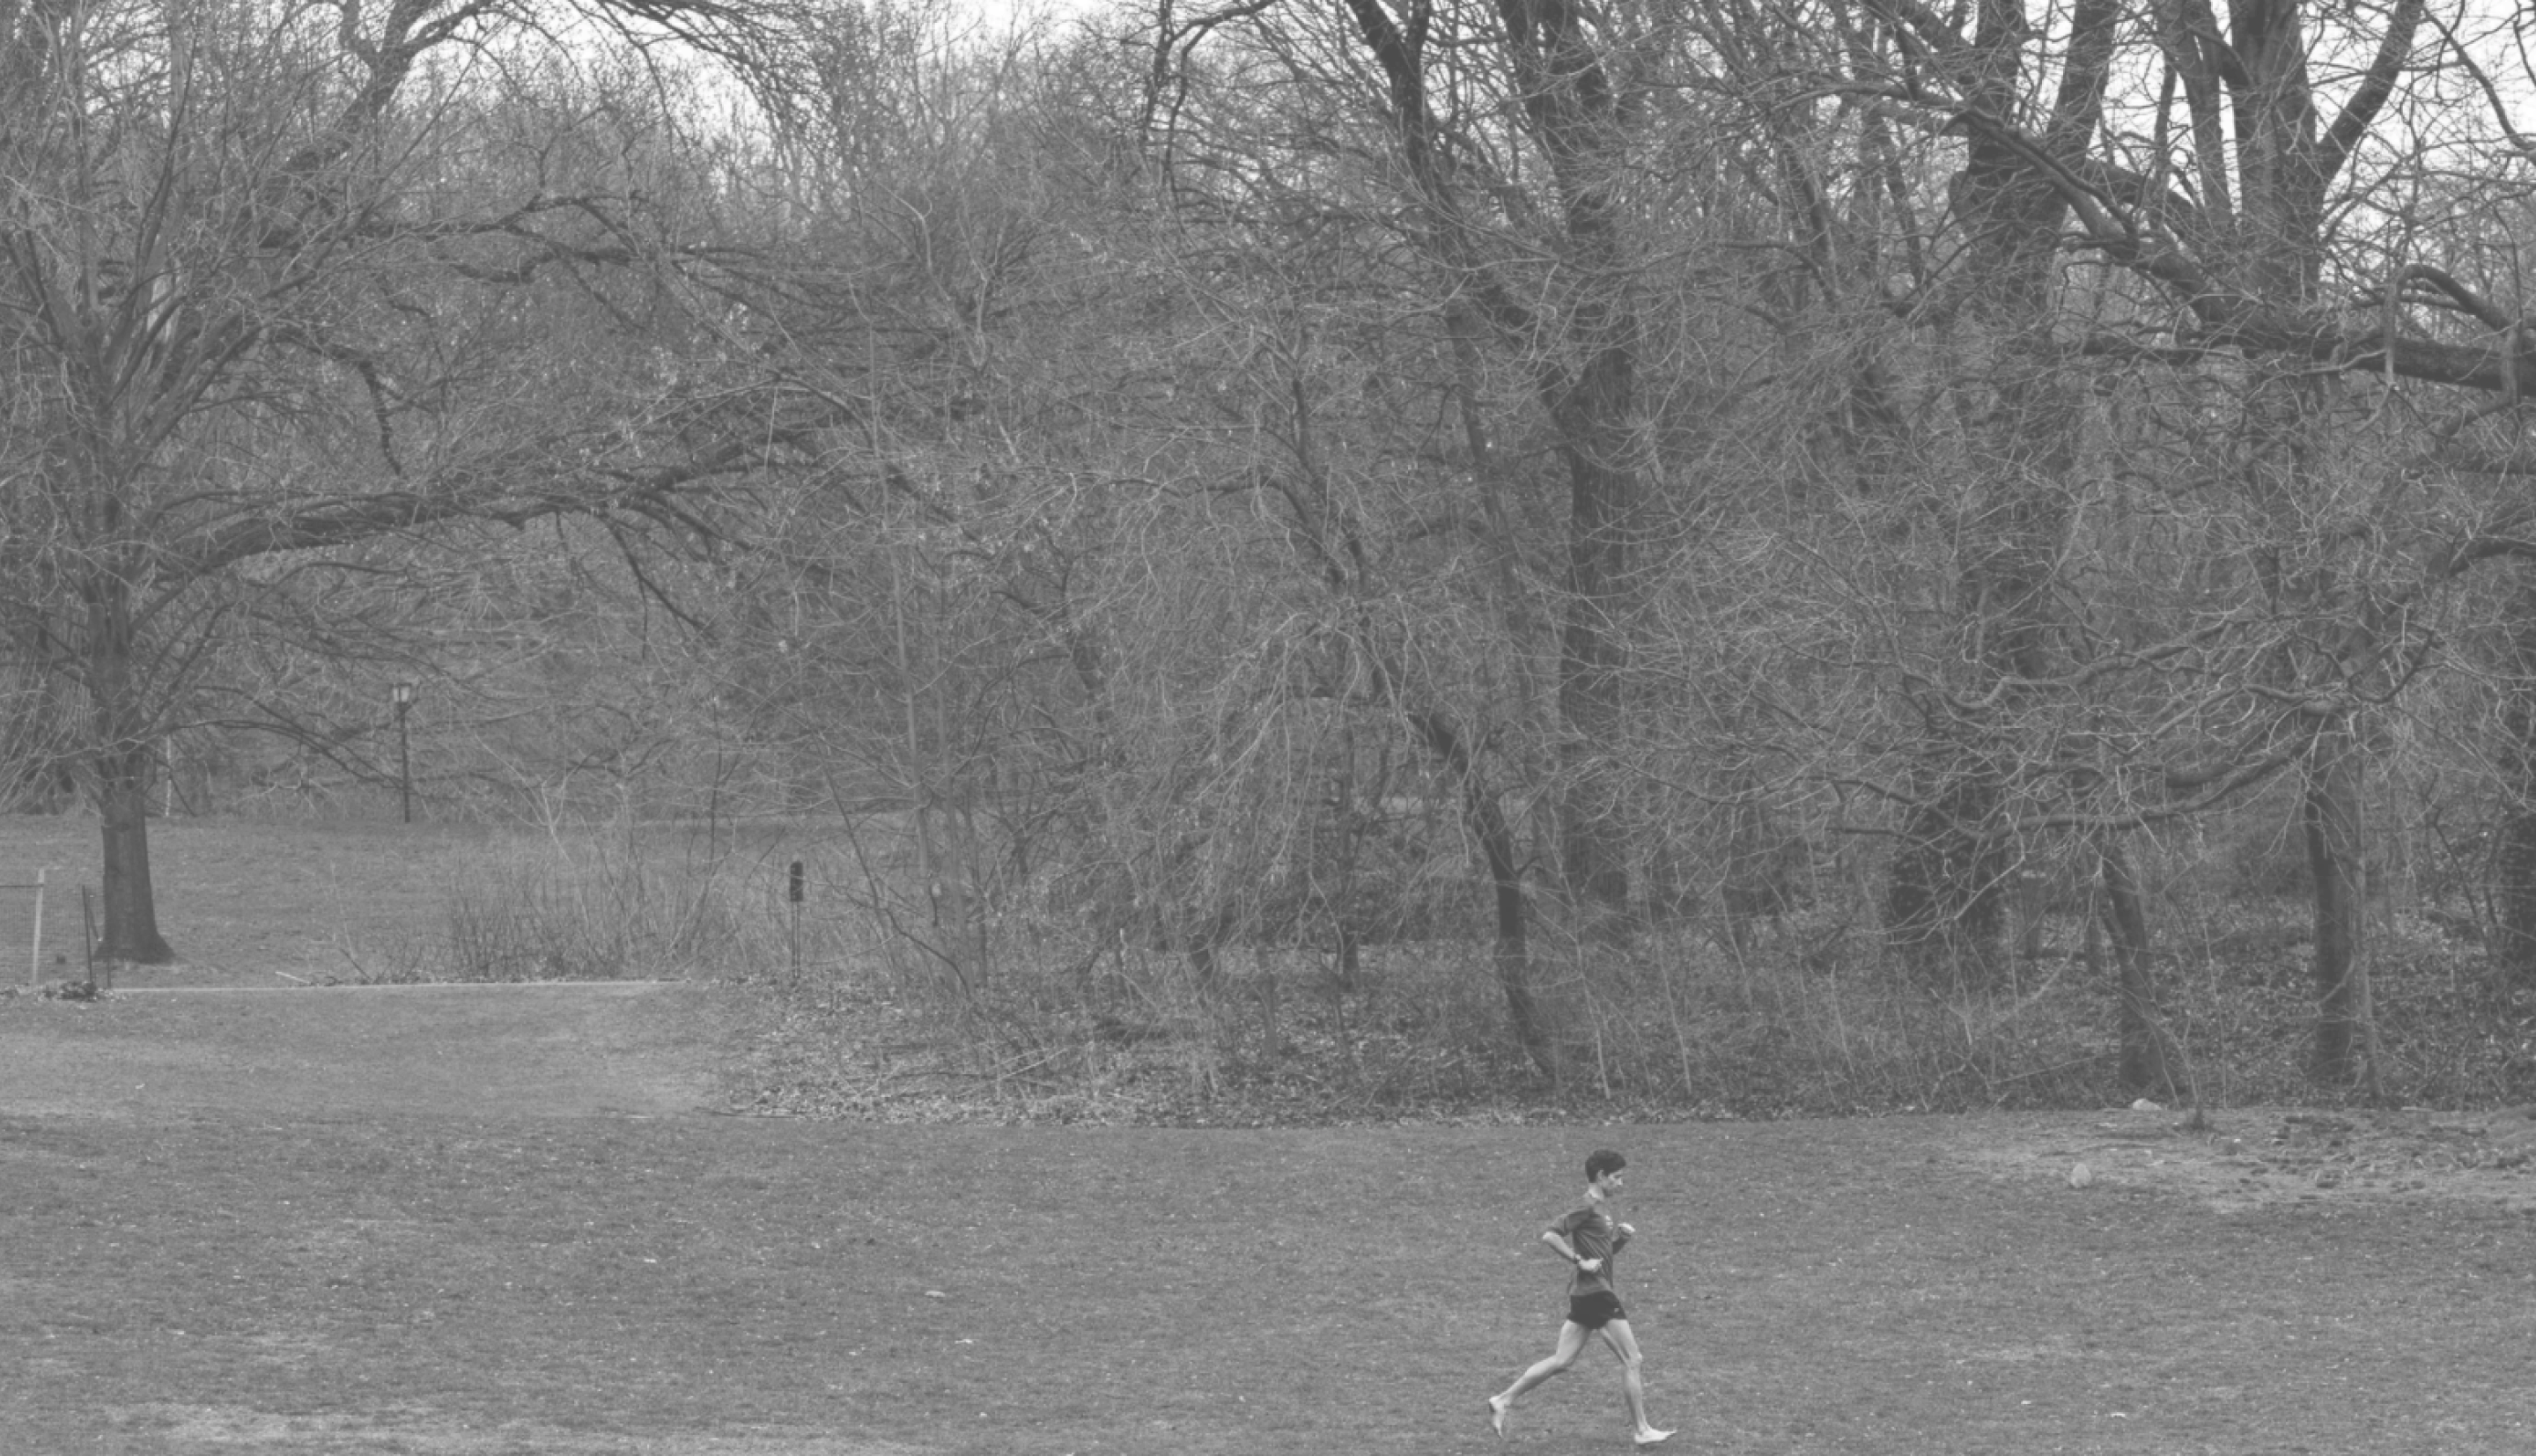 runner in a field with trees